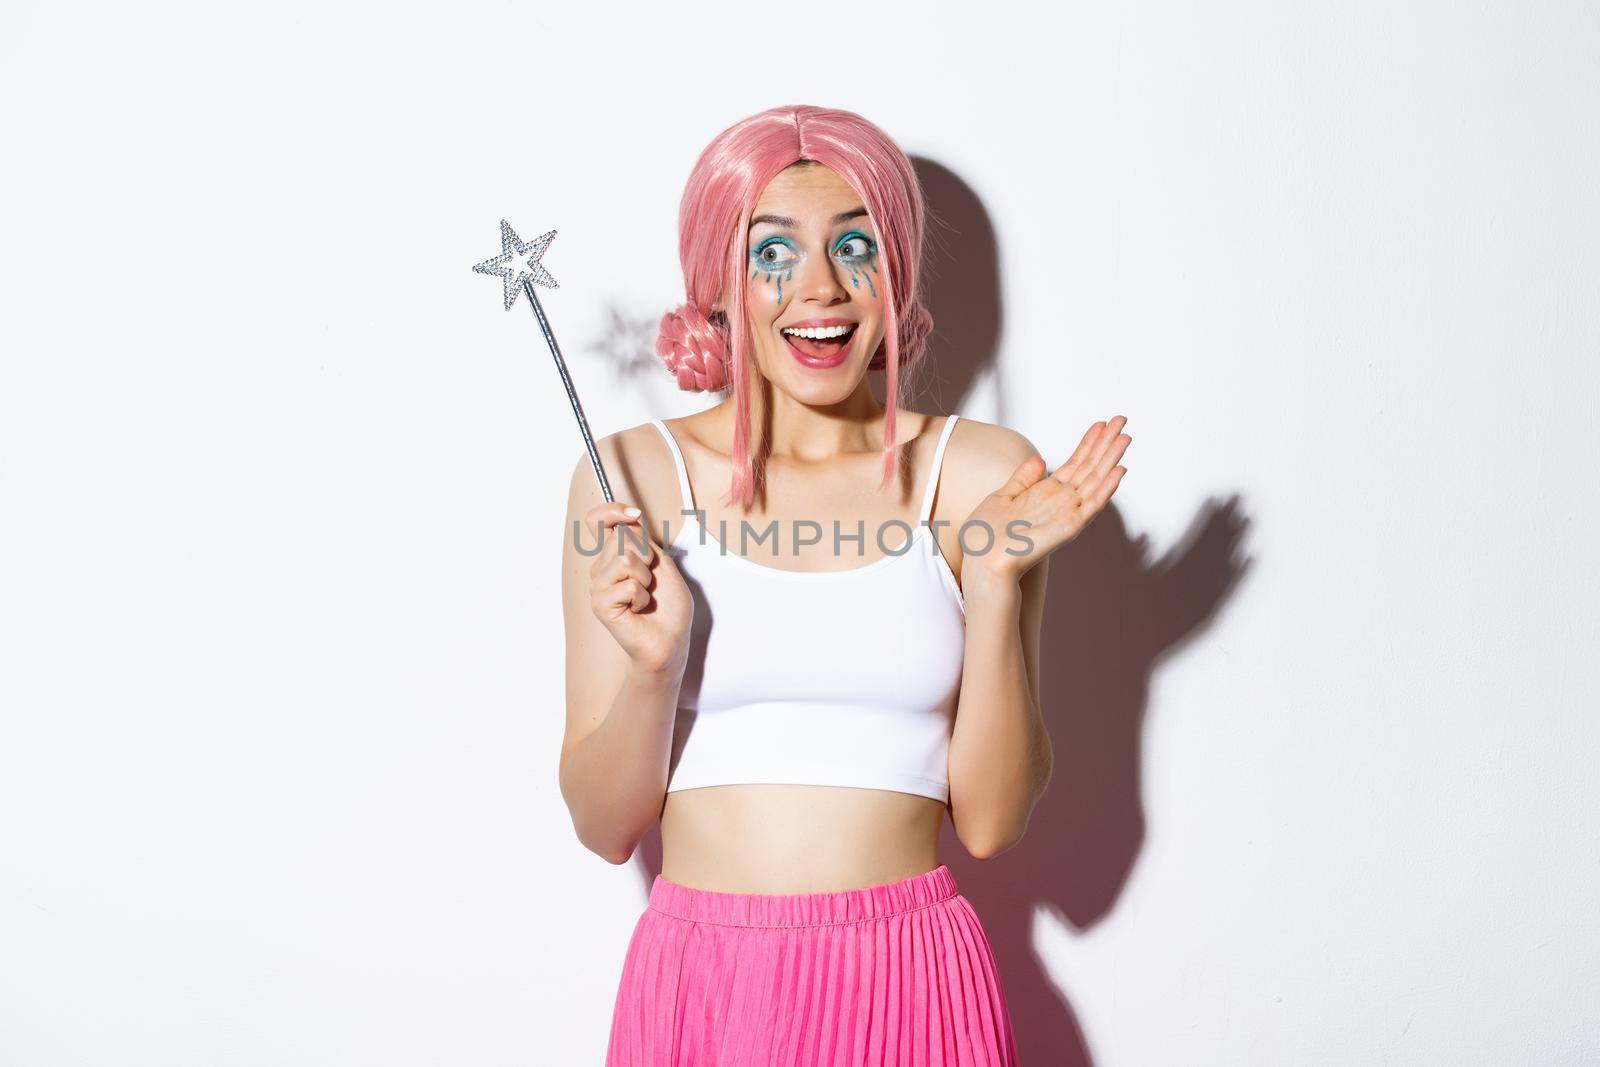 Portrait of pretty girl dressed up as cute fairy for halloween party, holding magic want and looking excited, celebrating holiday, standing over white background.